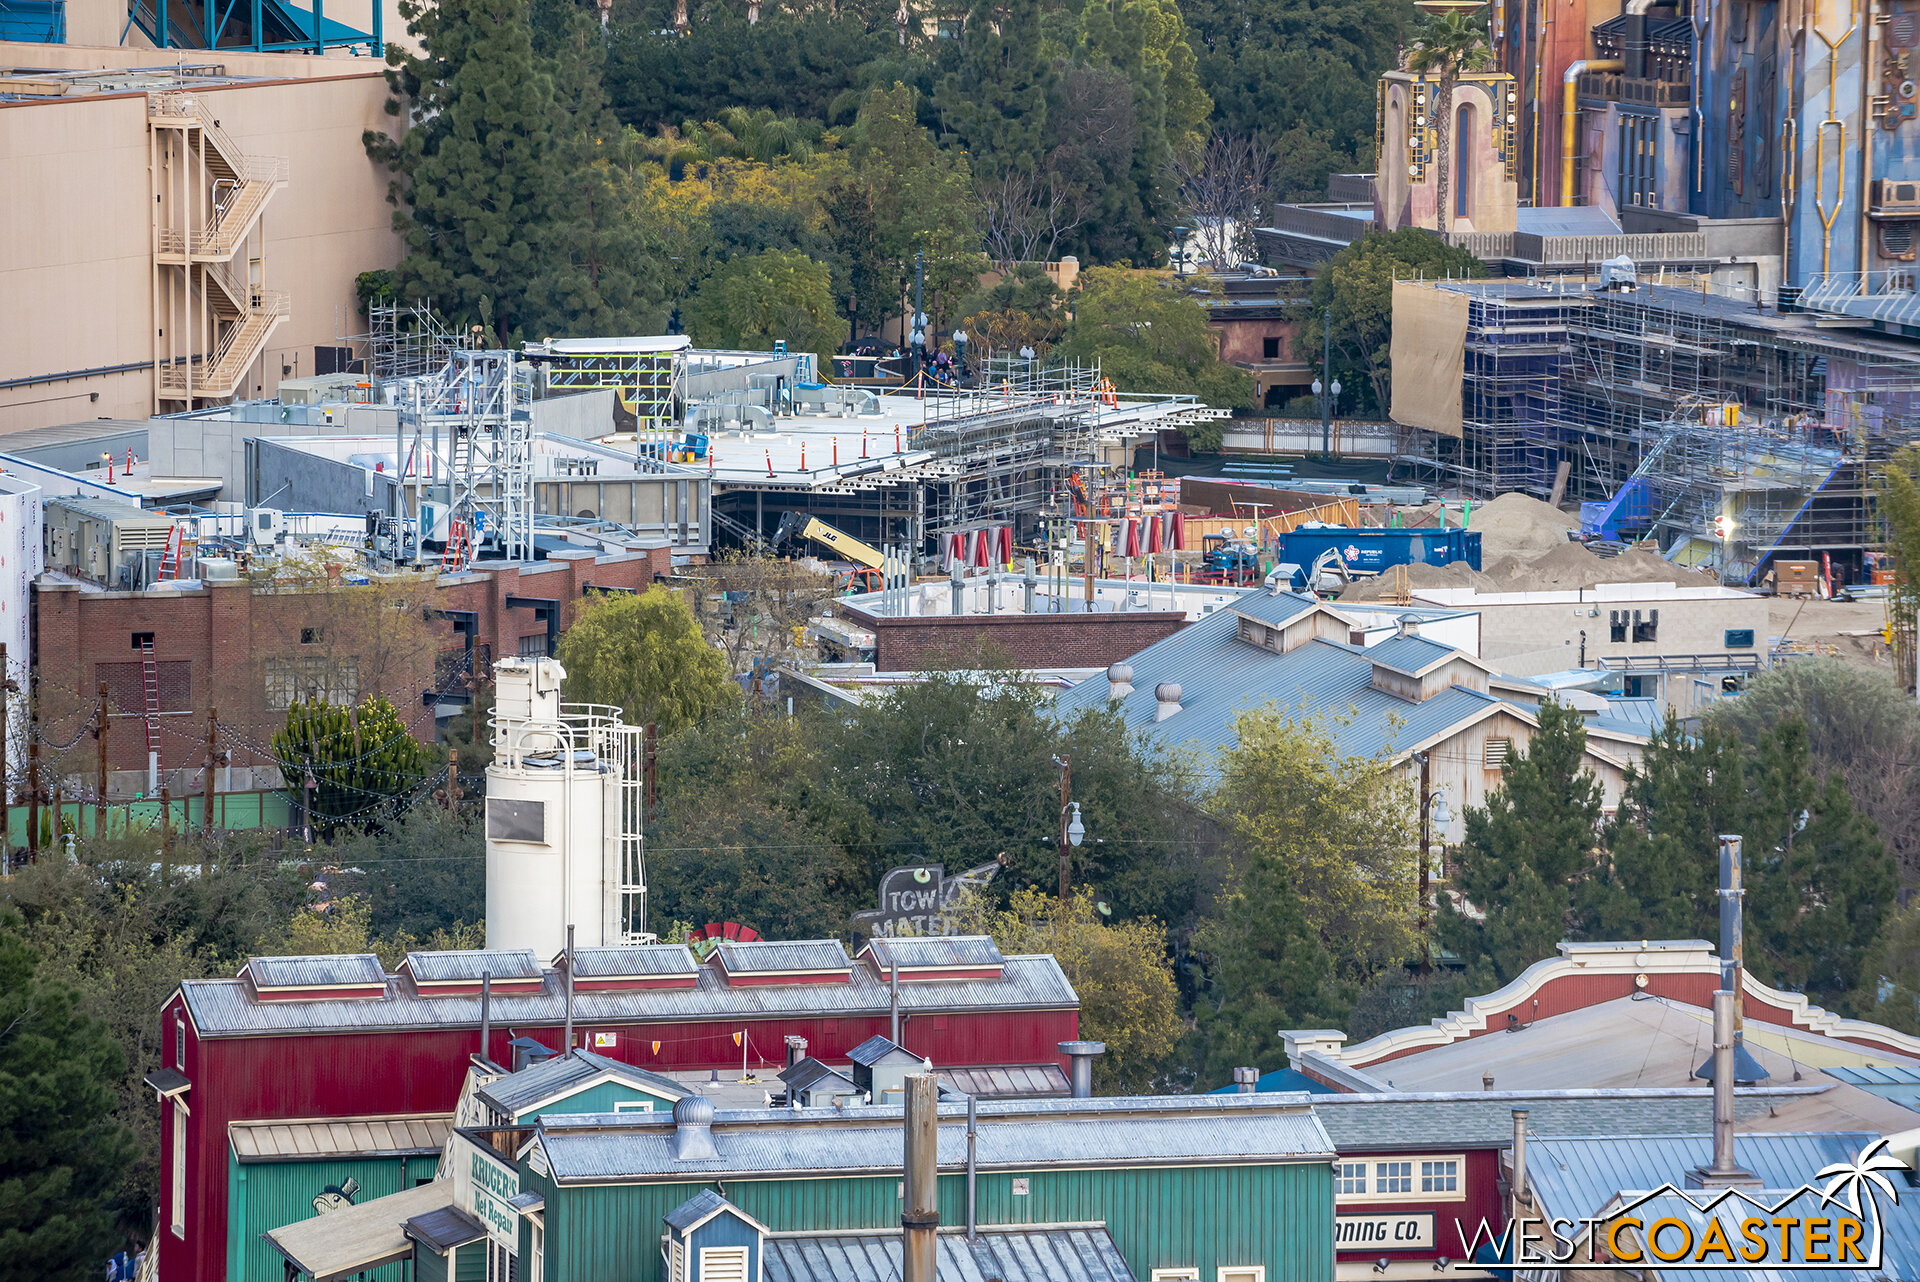  I do wonder how sightlines and adjacencies with Cars Land will work out, but we’ll see. 